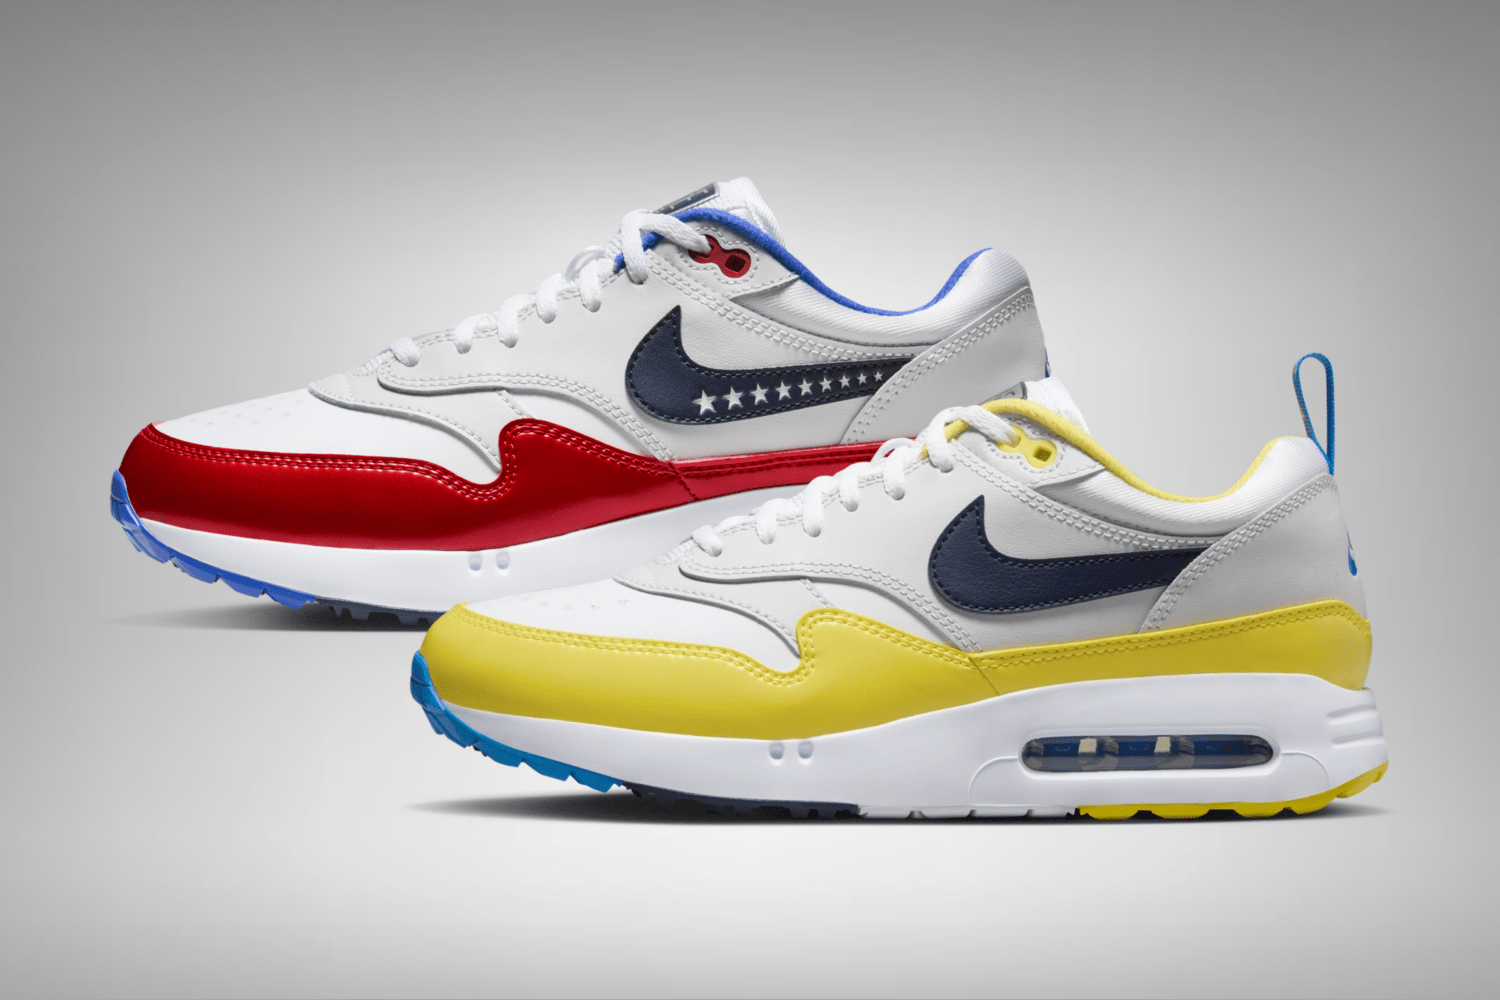 Nike comes out with an Air Max 1 '86 Golf 'Ryder Cup' pack